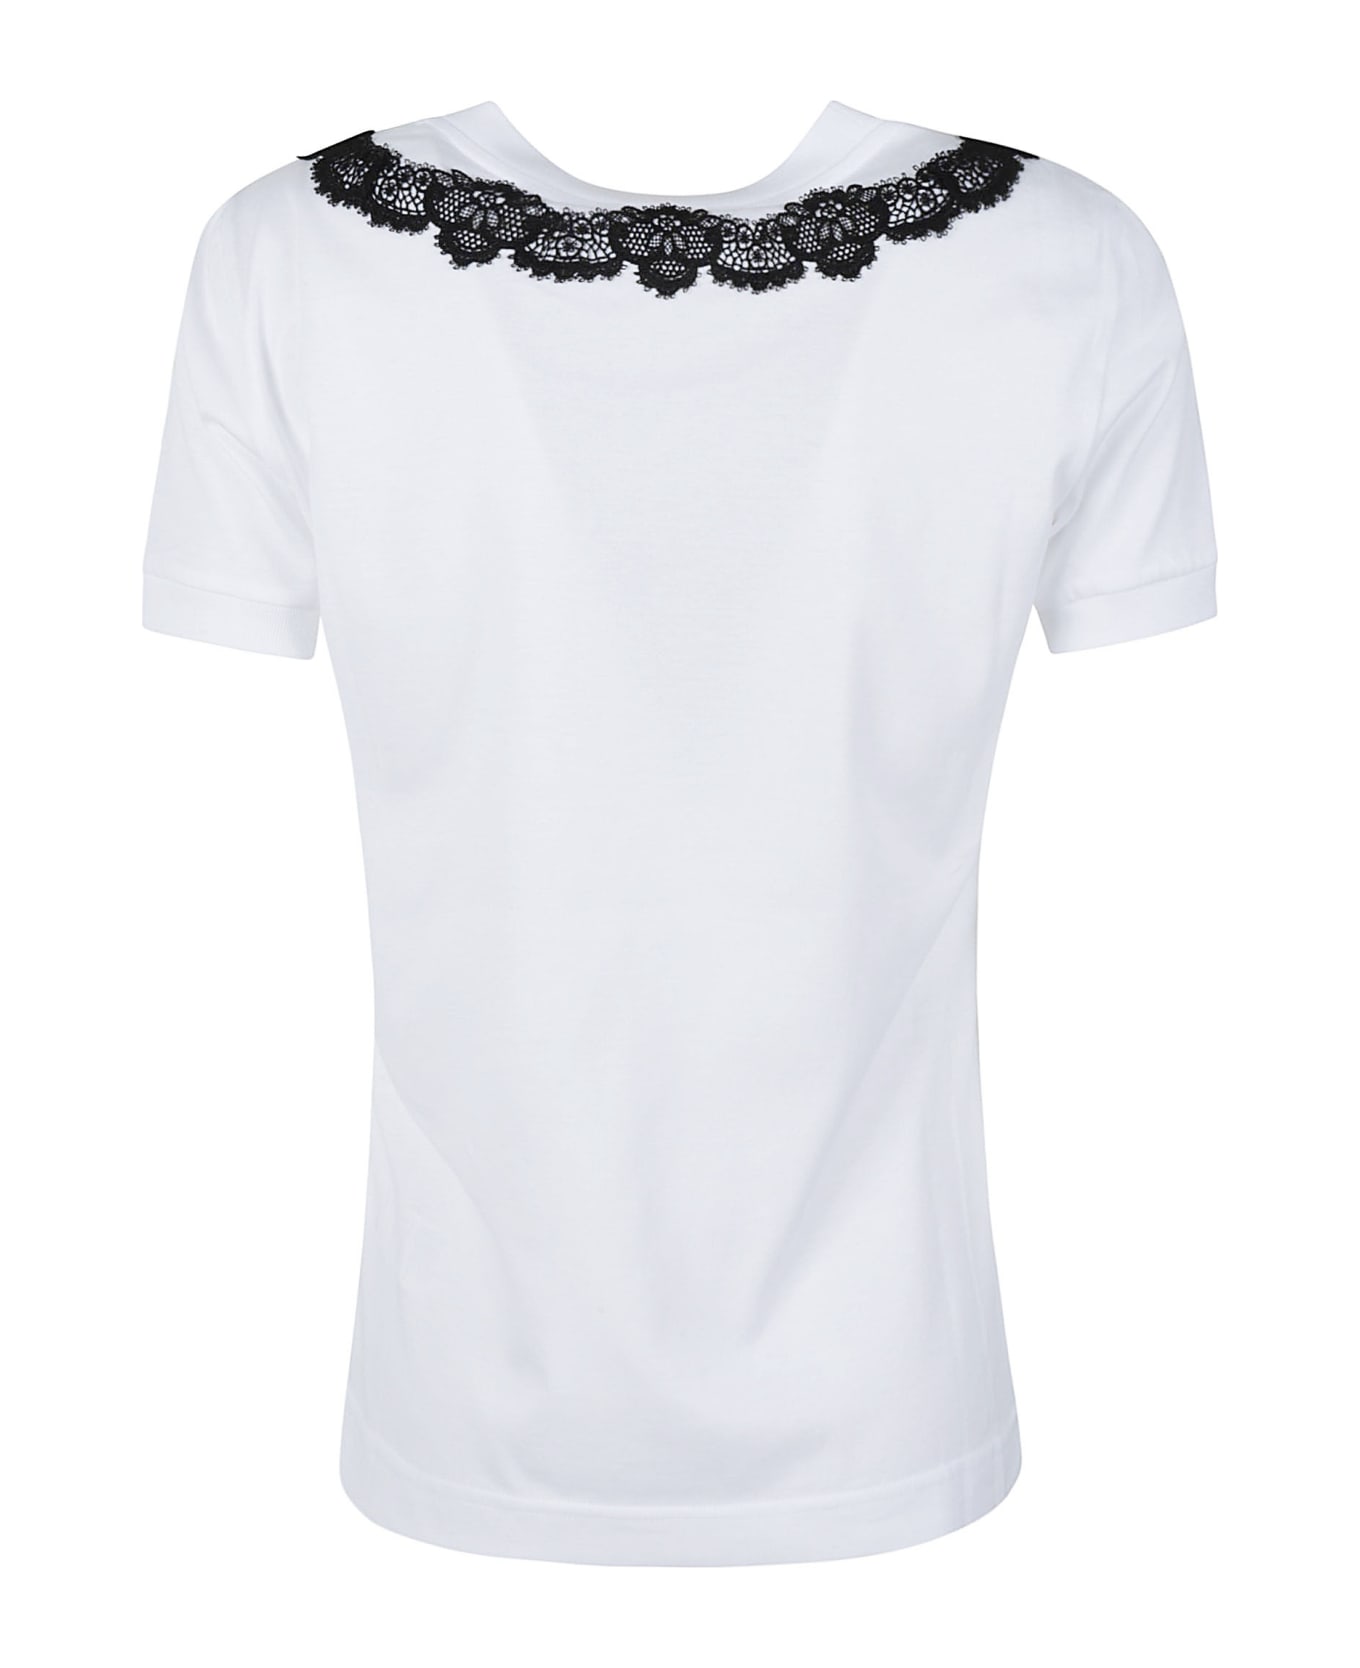 Dolce & Gabbana Embroidery Detail T-shirt - White